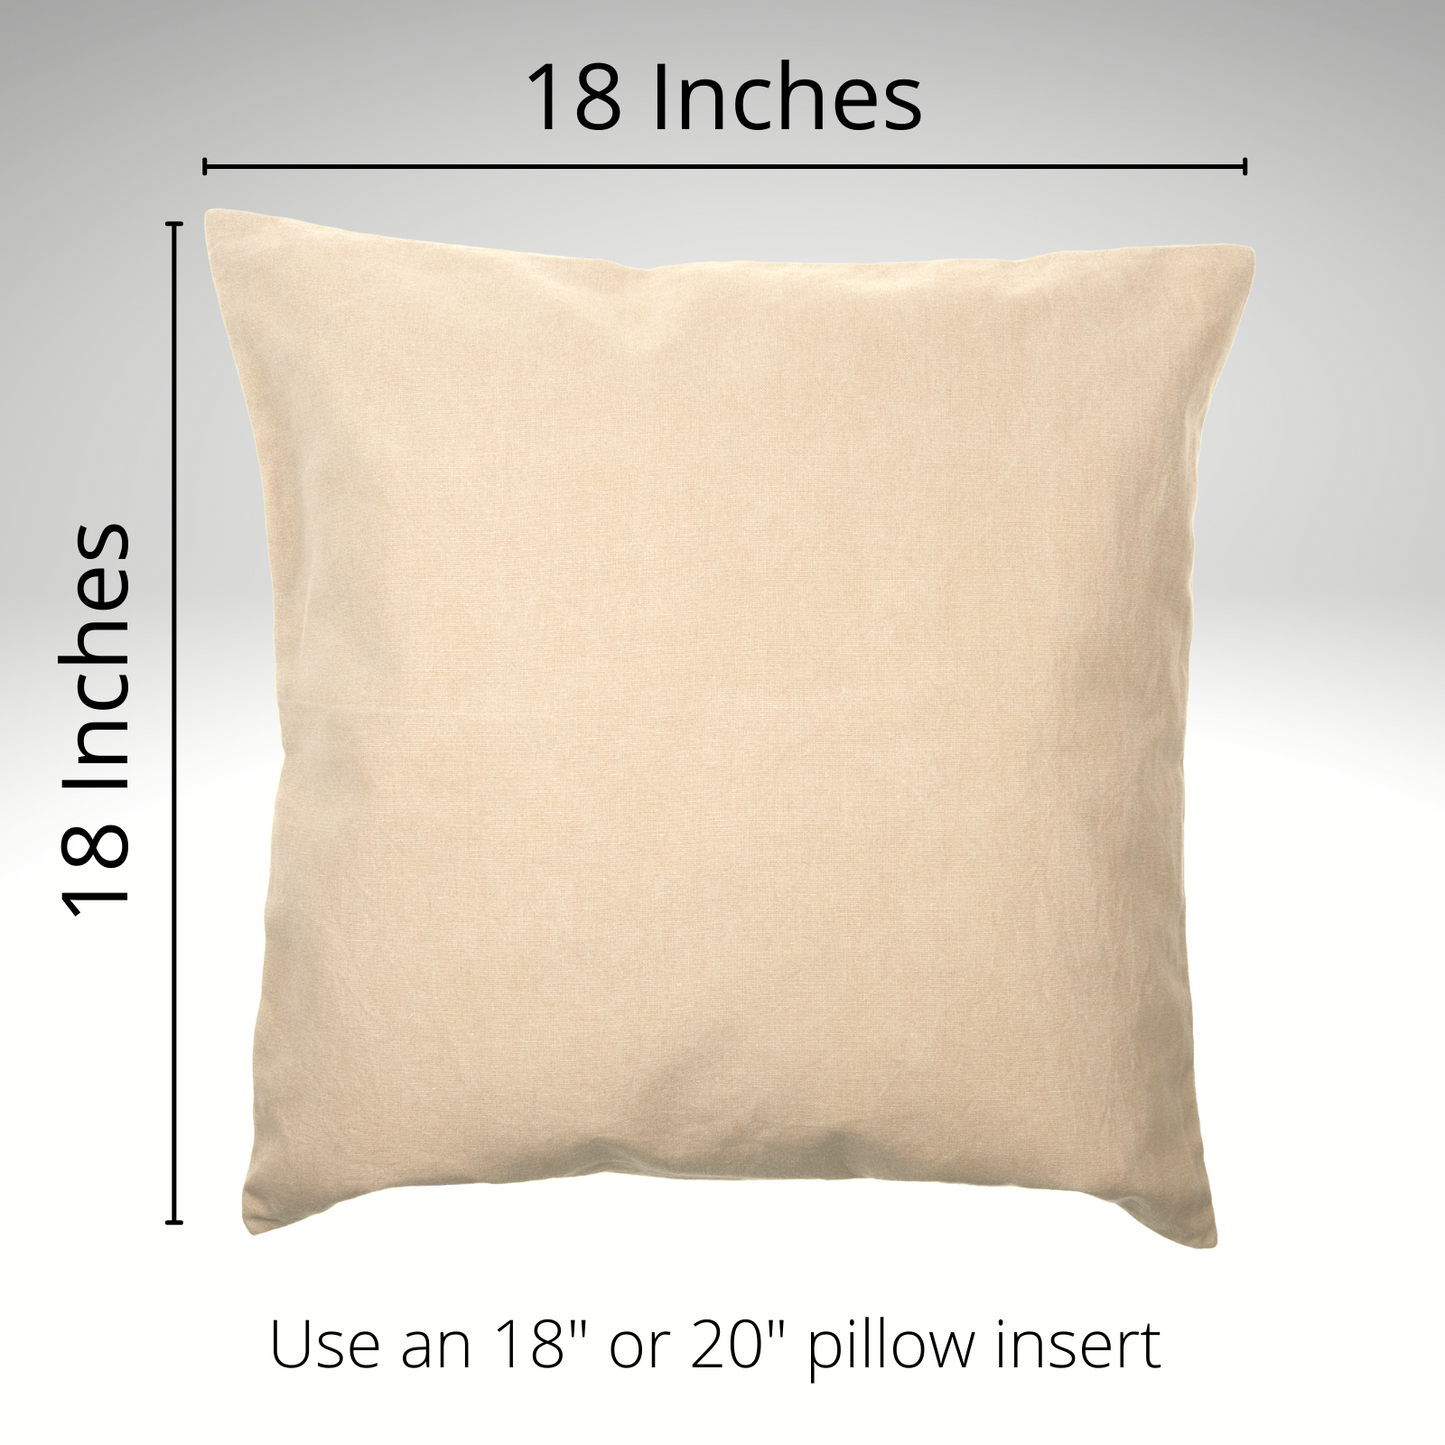 Thankful and Blessed Pillow Cover